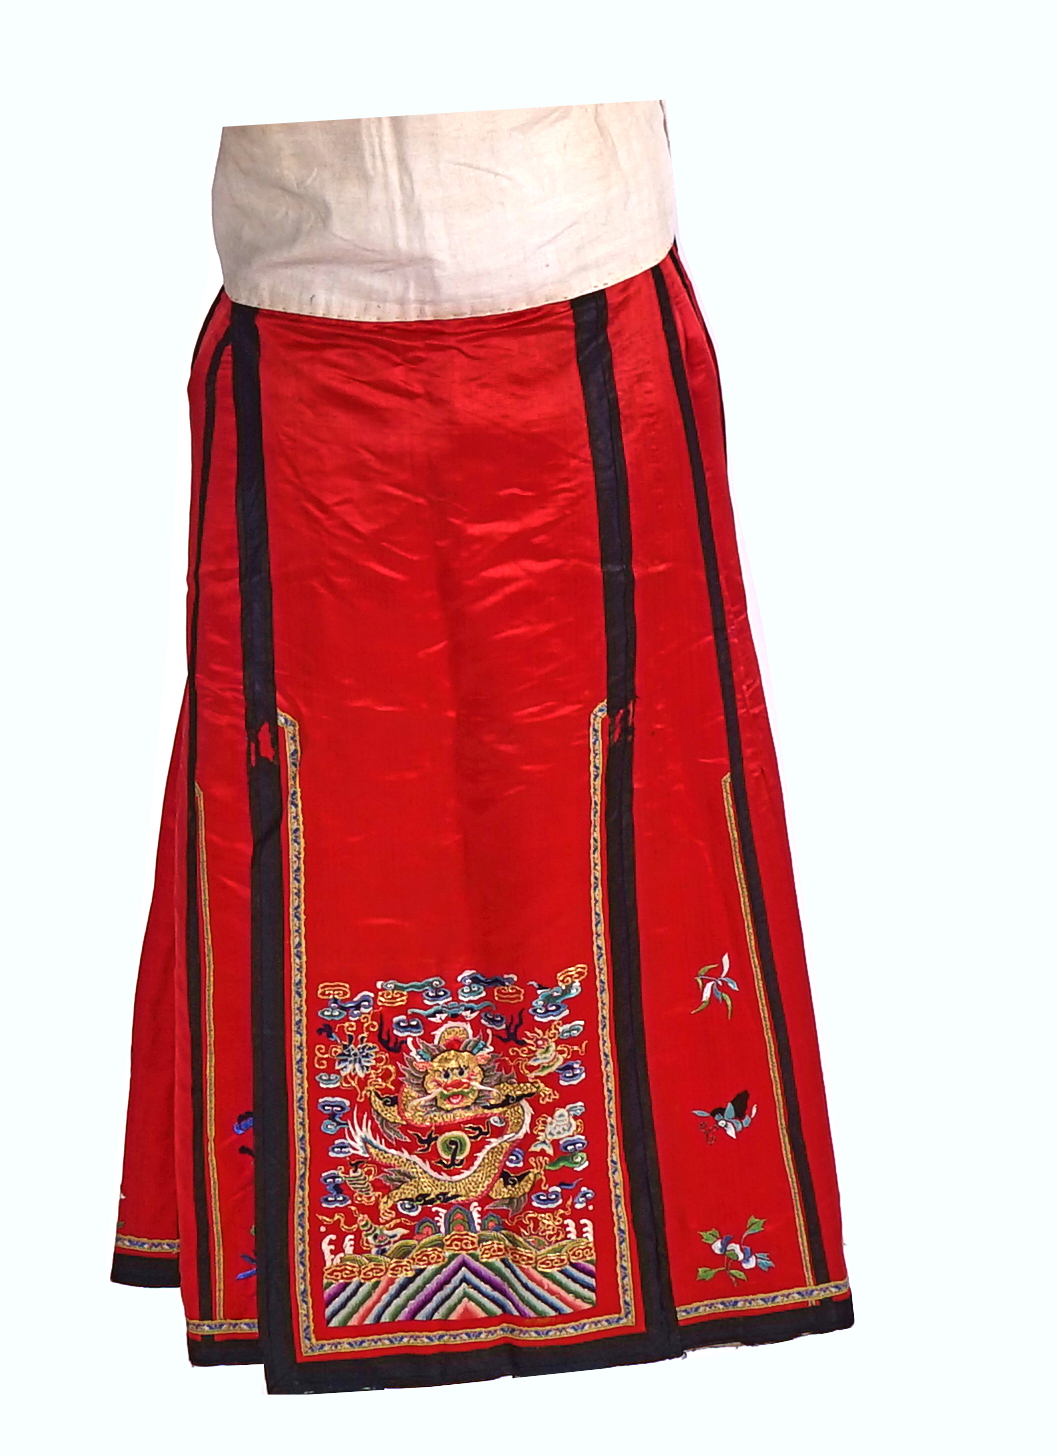 TWO CHINESE EMBROIDERED SILK APRON SKIRTS - Image 3 of 5